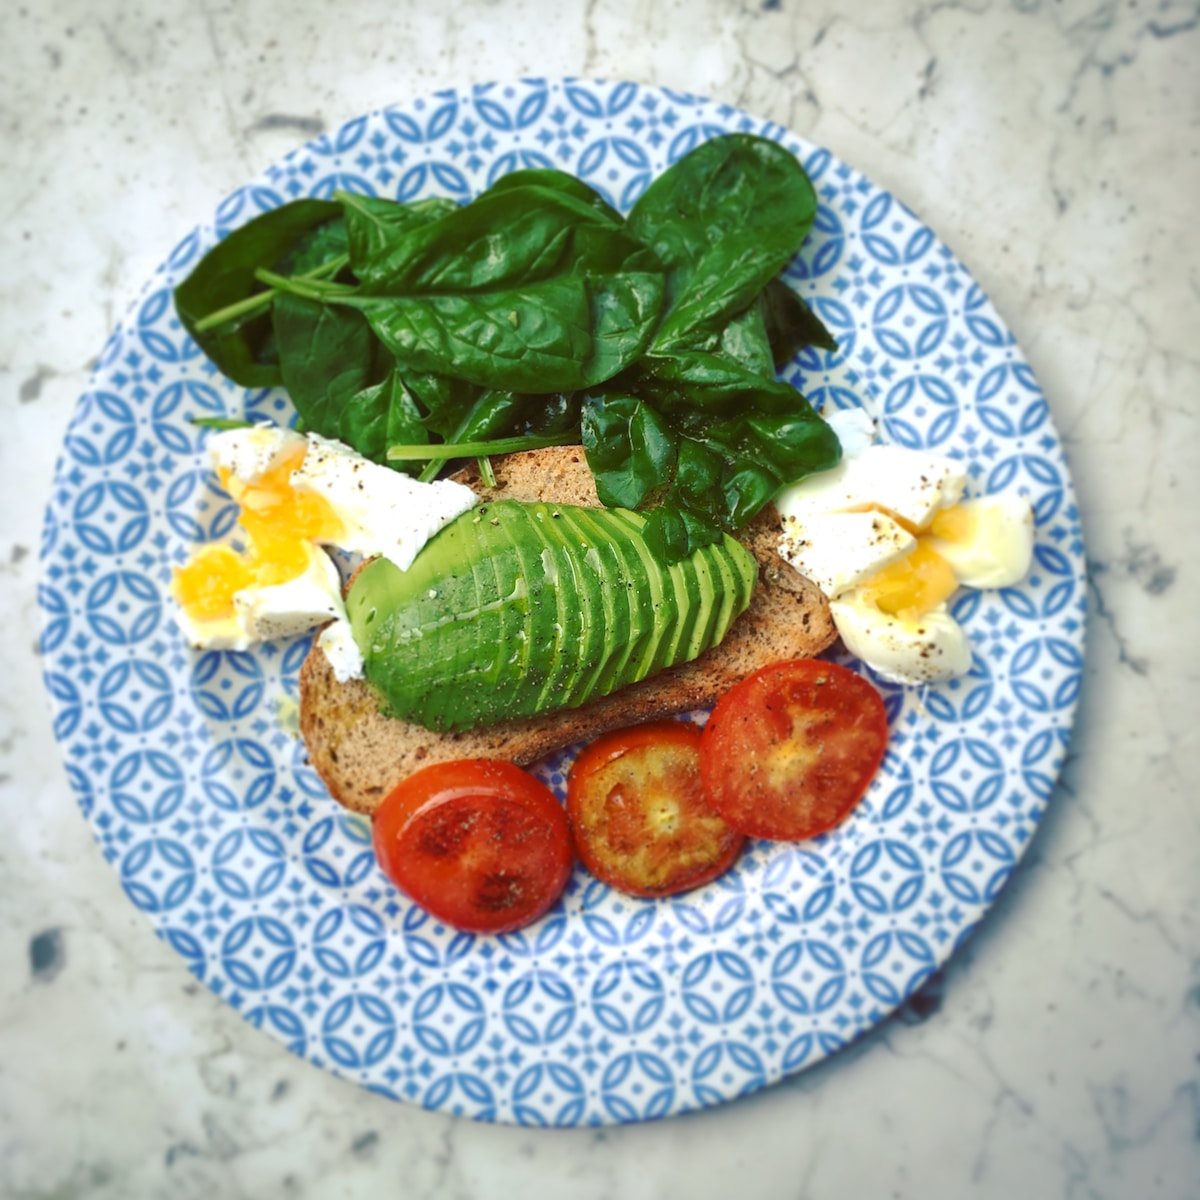 Can you regenerate your health with Keto?